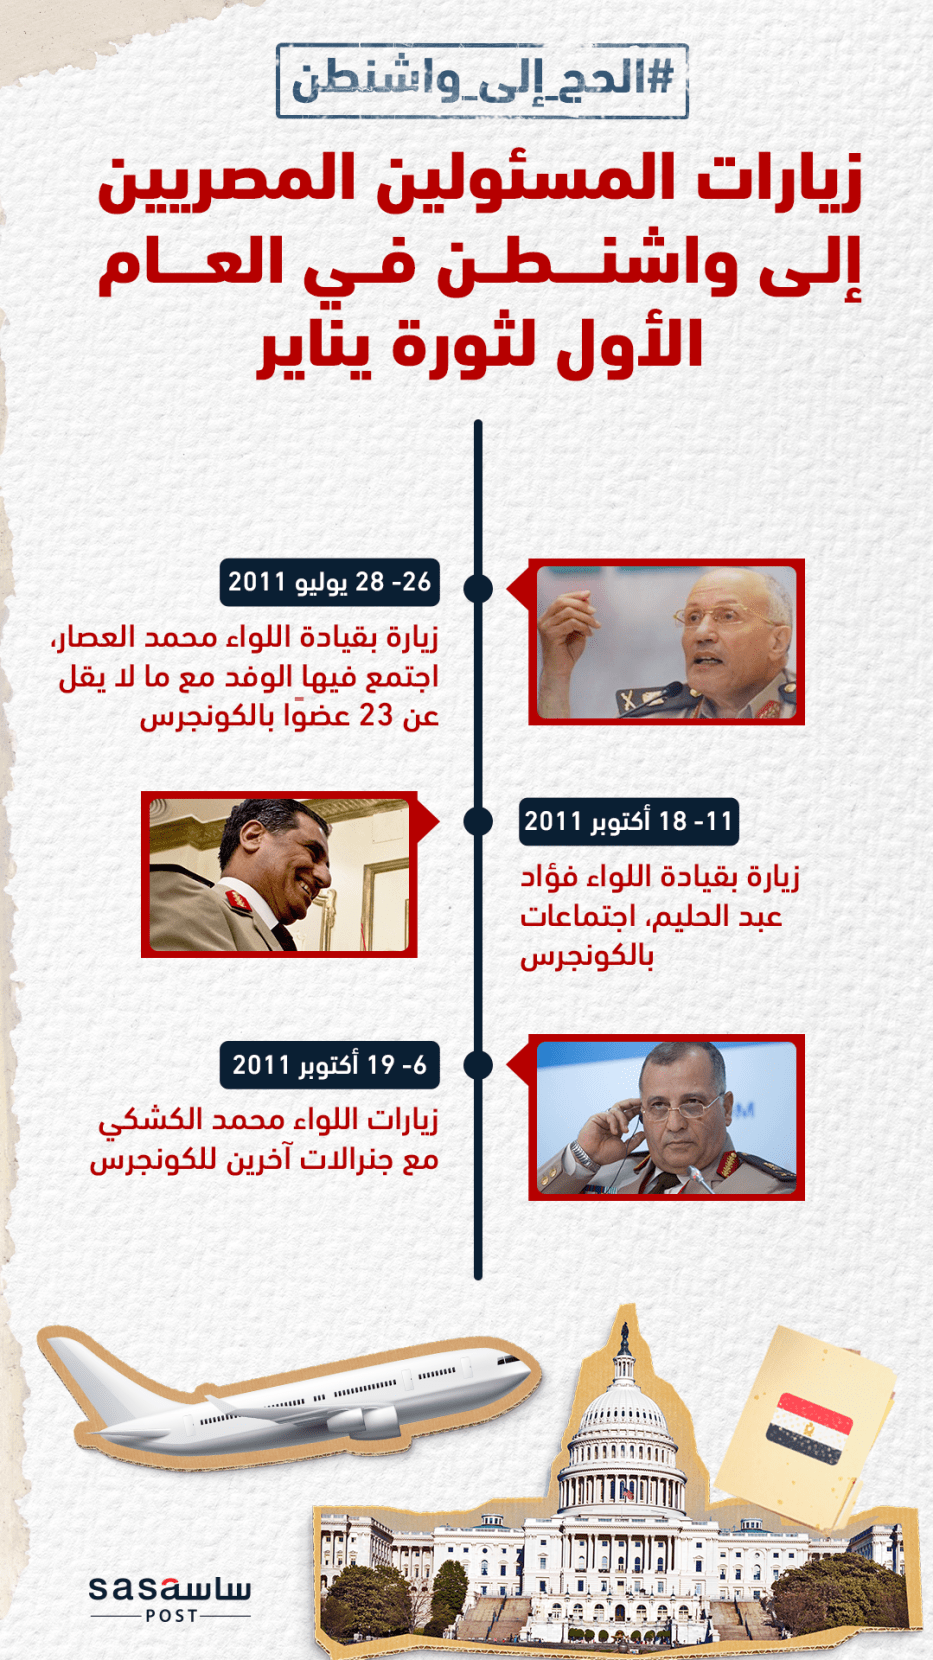 Showing three trips of the SCAF delegations led by Major General Mohamed Al-Assar, Major General Fouad Abdel Halim and Major General Mohammed Al-Kashki. These trips took place in the first year of the January Revolution. Source: US Department of Justice website [sasapost.com]